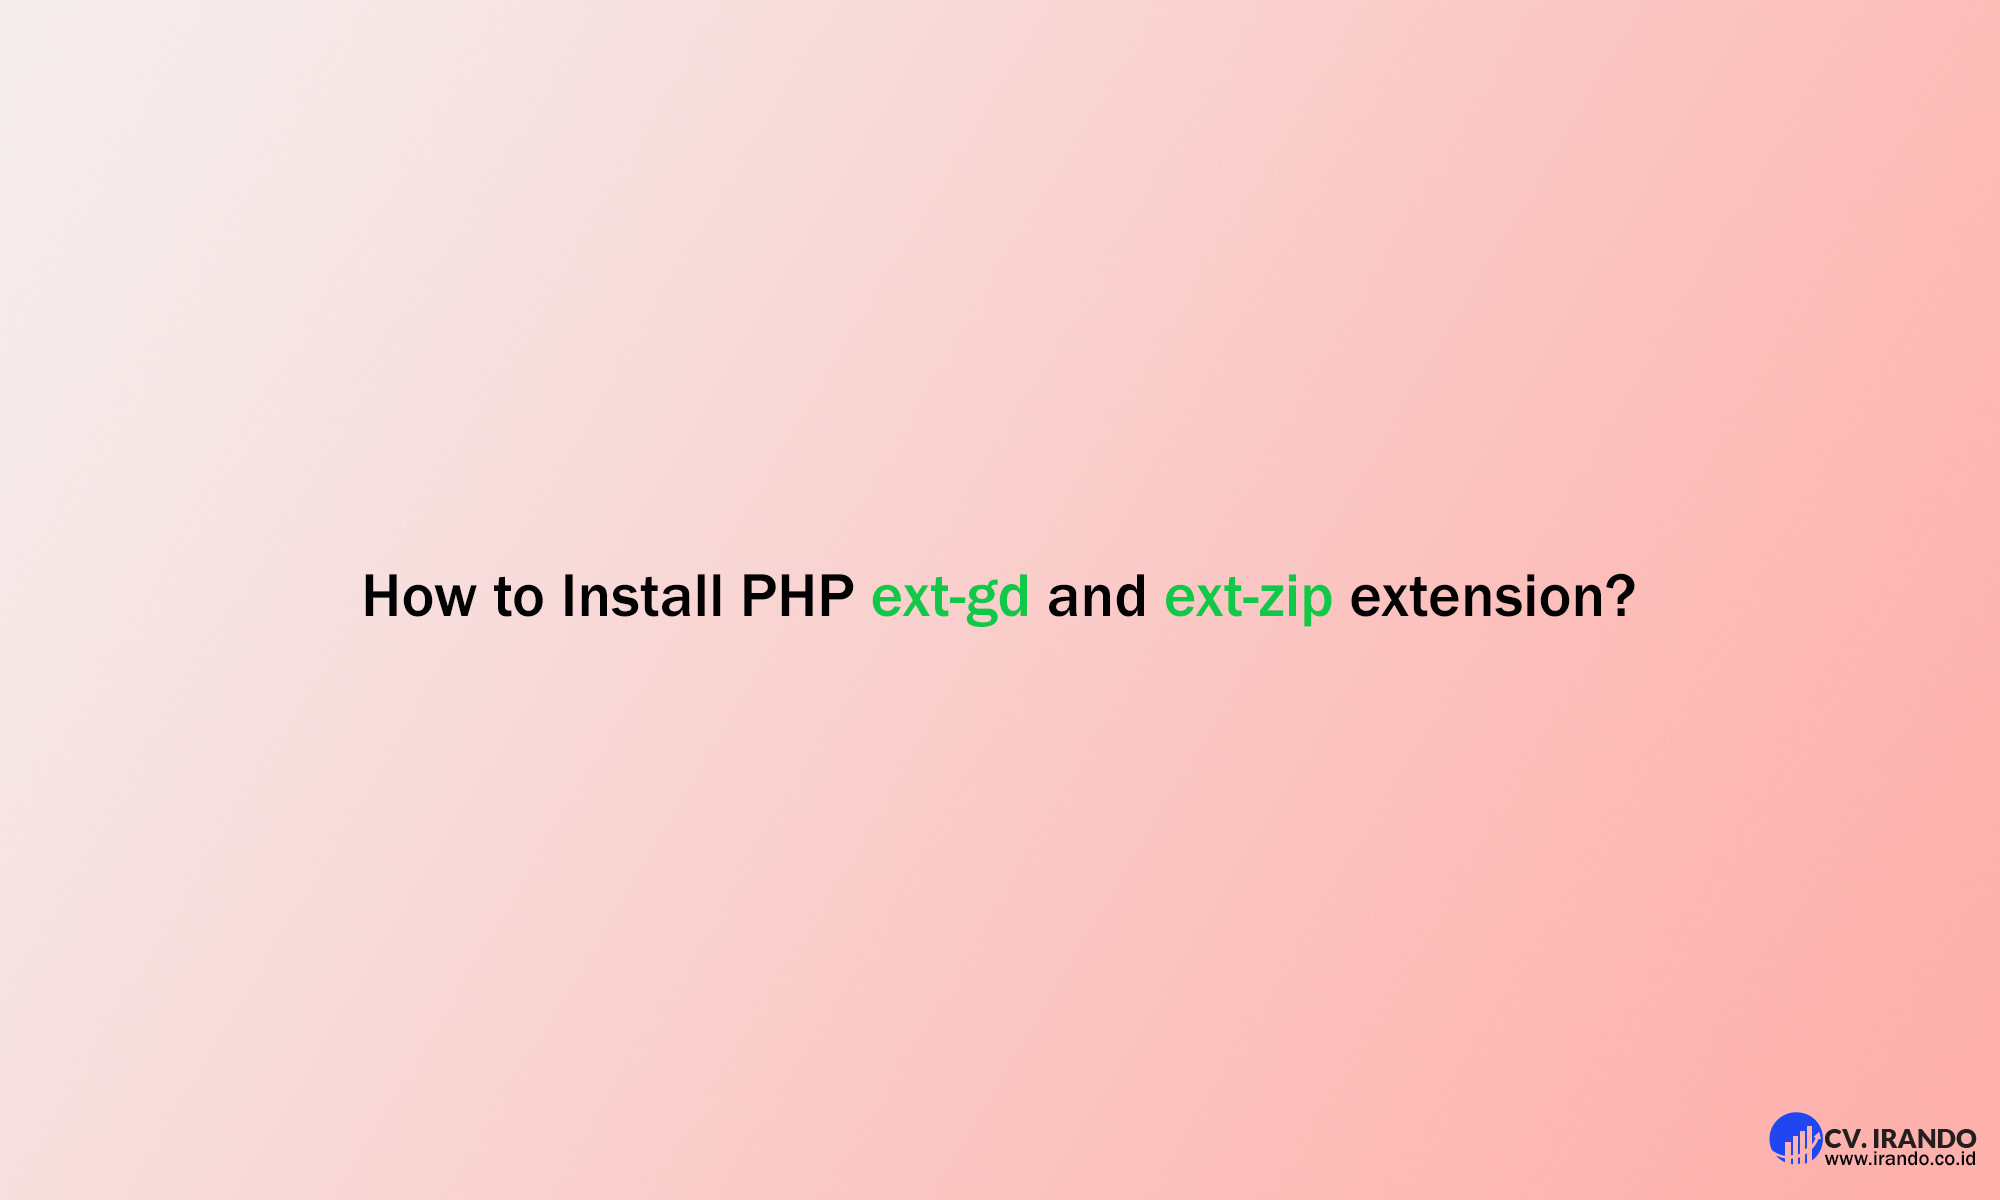 How to Install PHP ext-gd and ext-zip extension